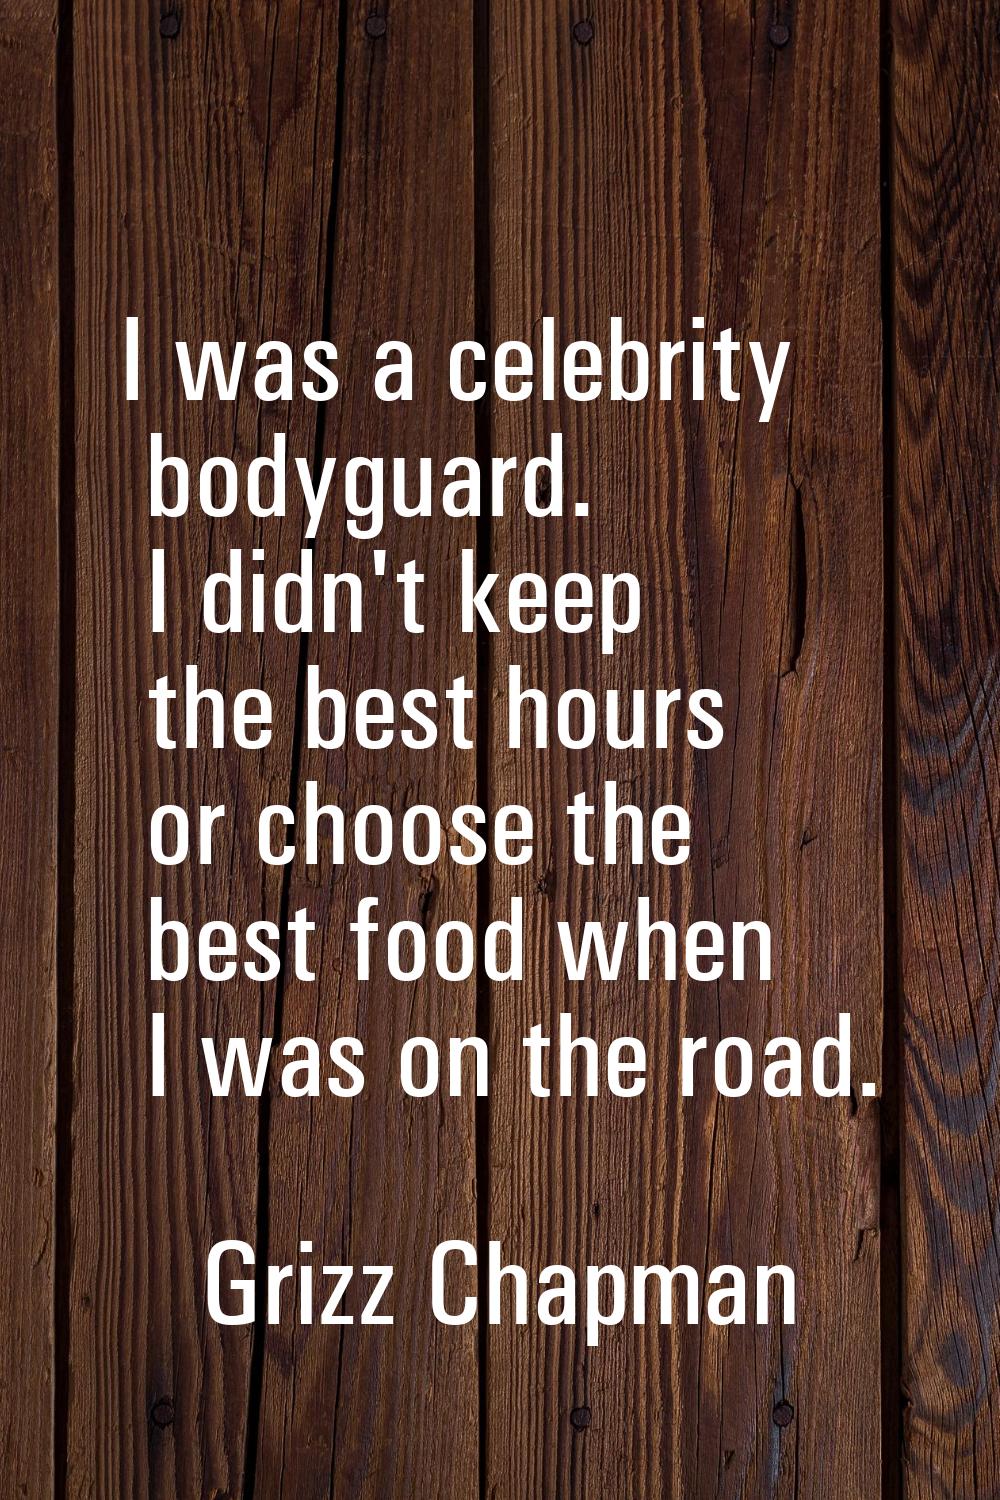 I was a celebrity bodyguard. I didn't keep the best hours or choose the best food when I was on the